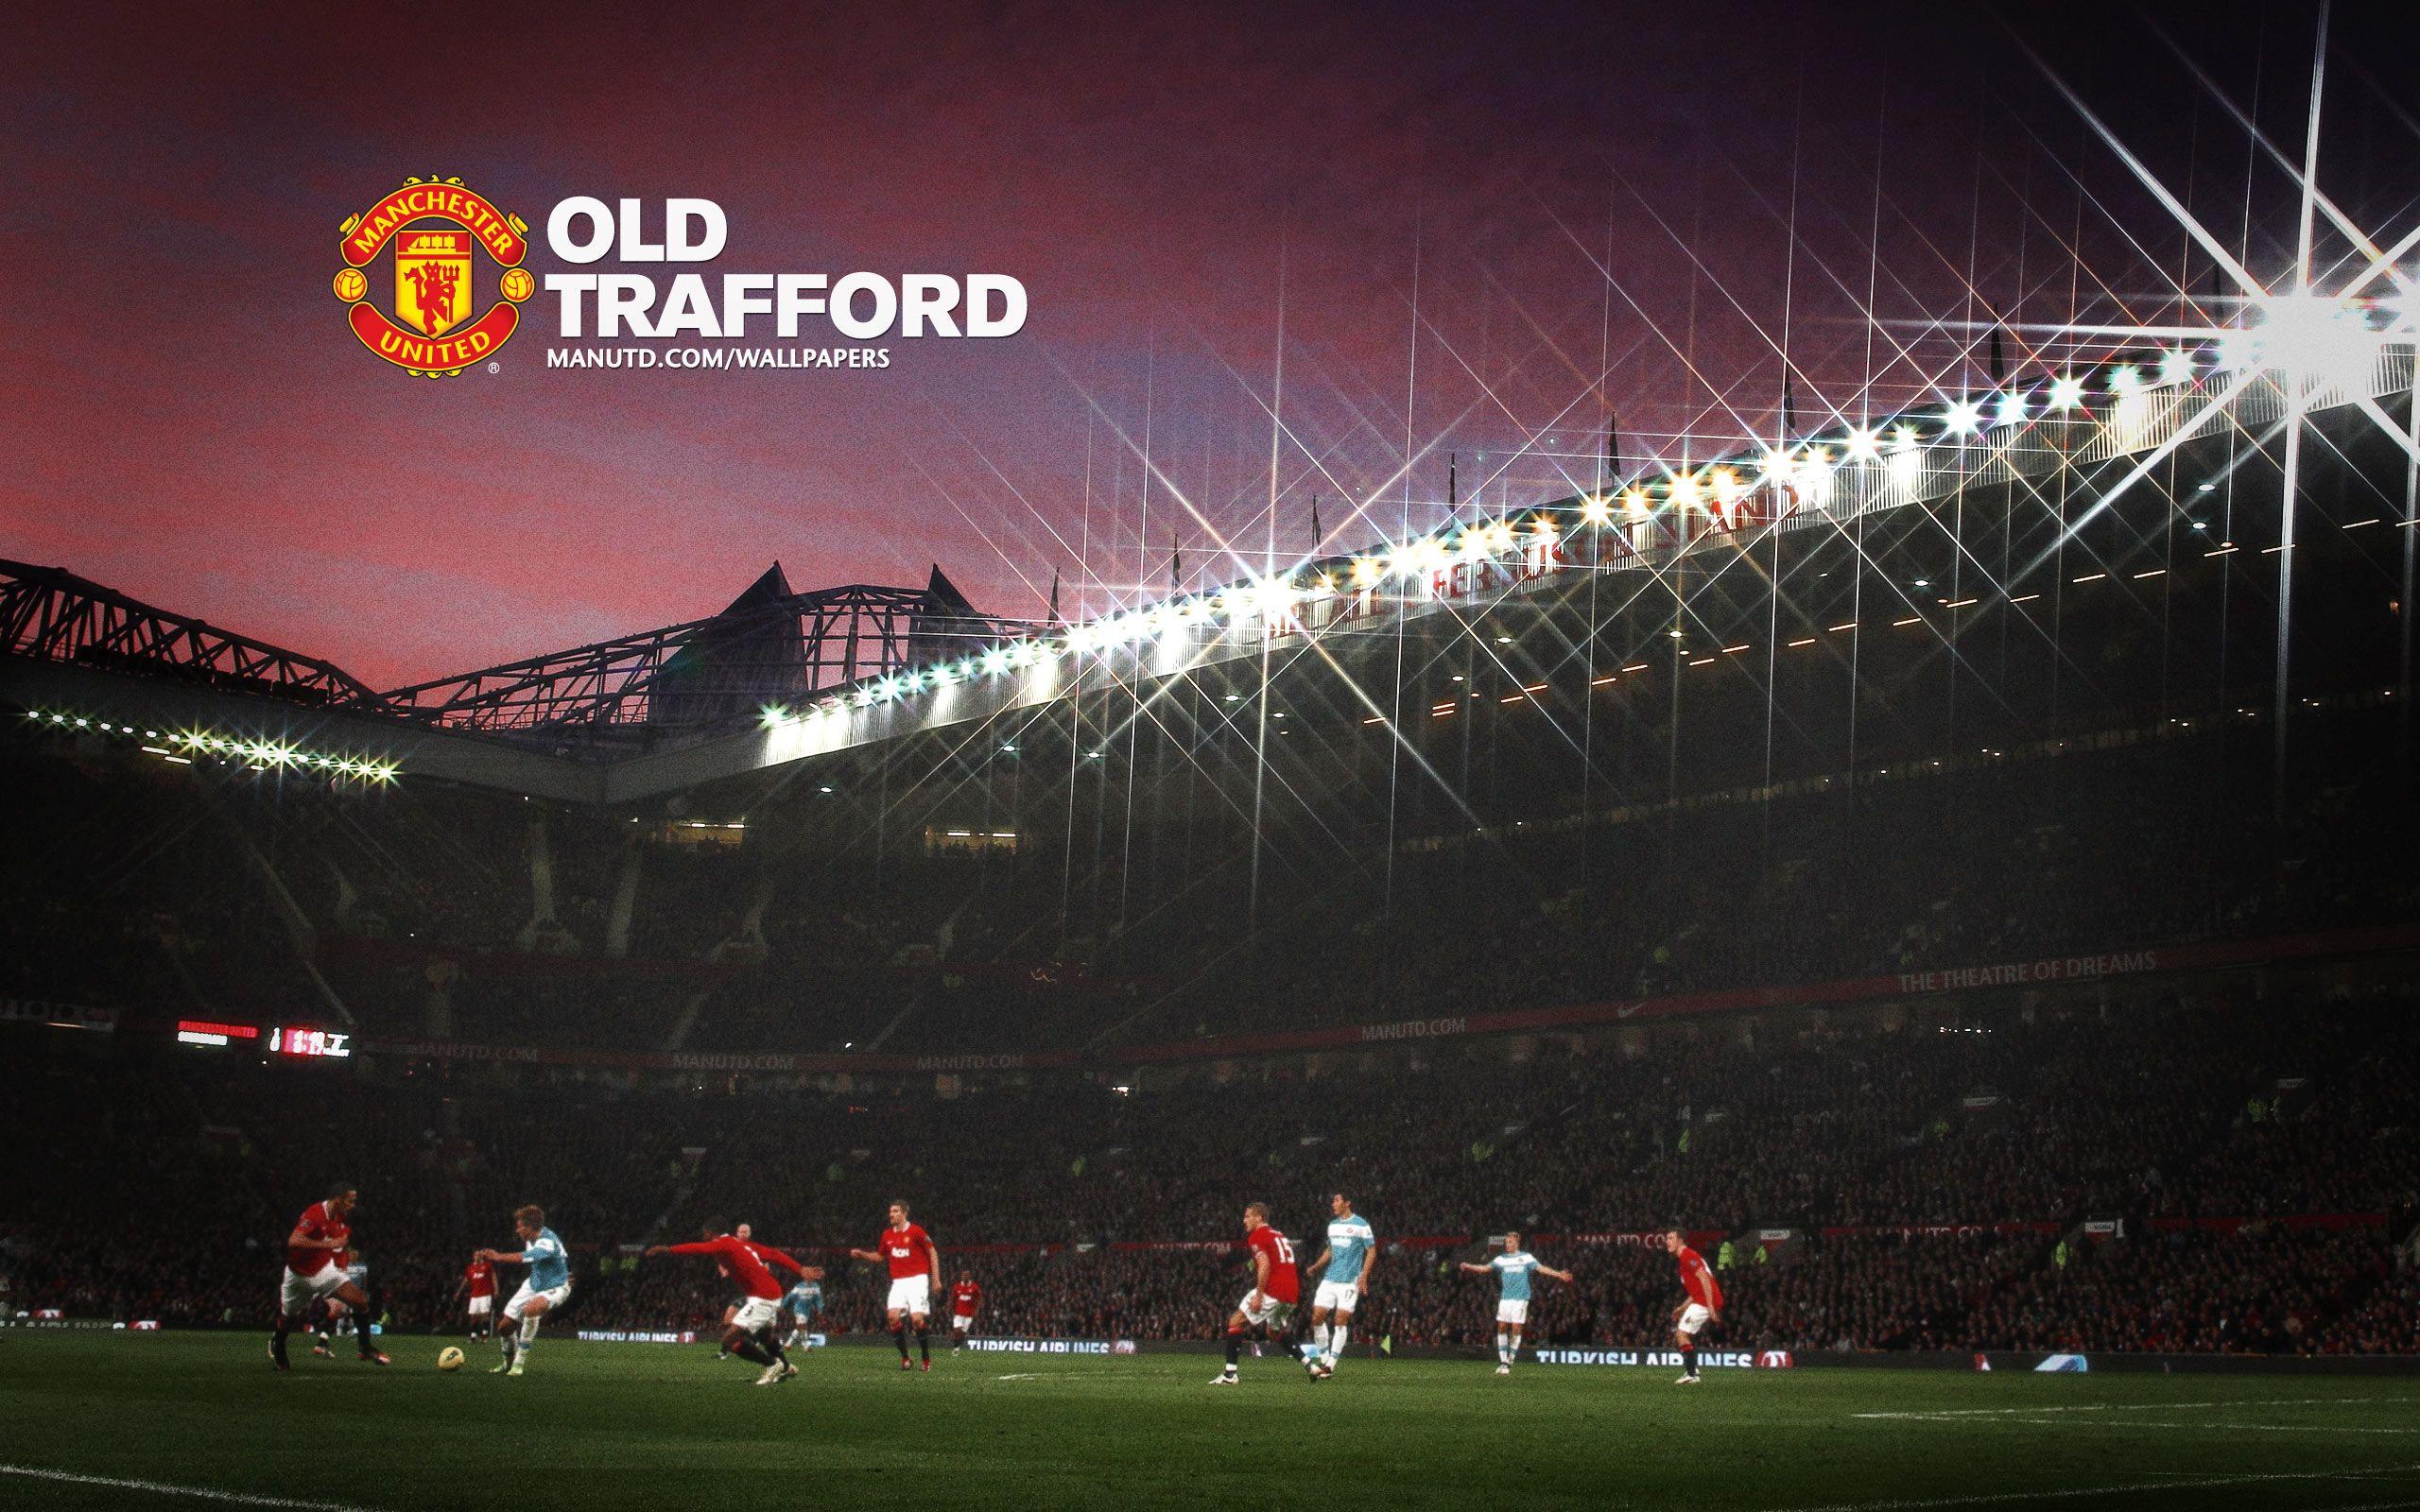 Man Uniteds Old Trafford Stadium HD Wallpapers for Mobile Free Download